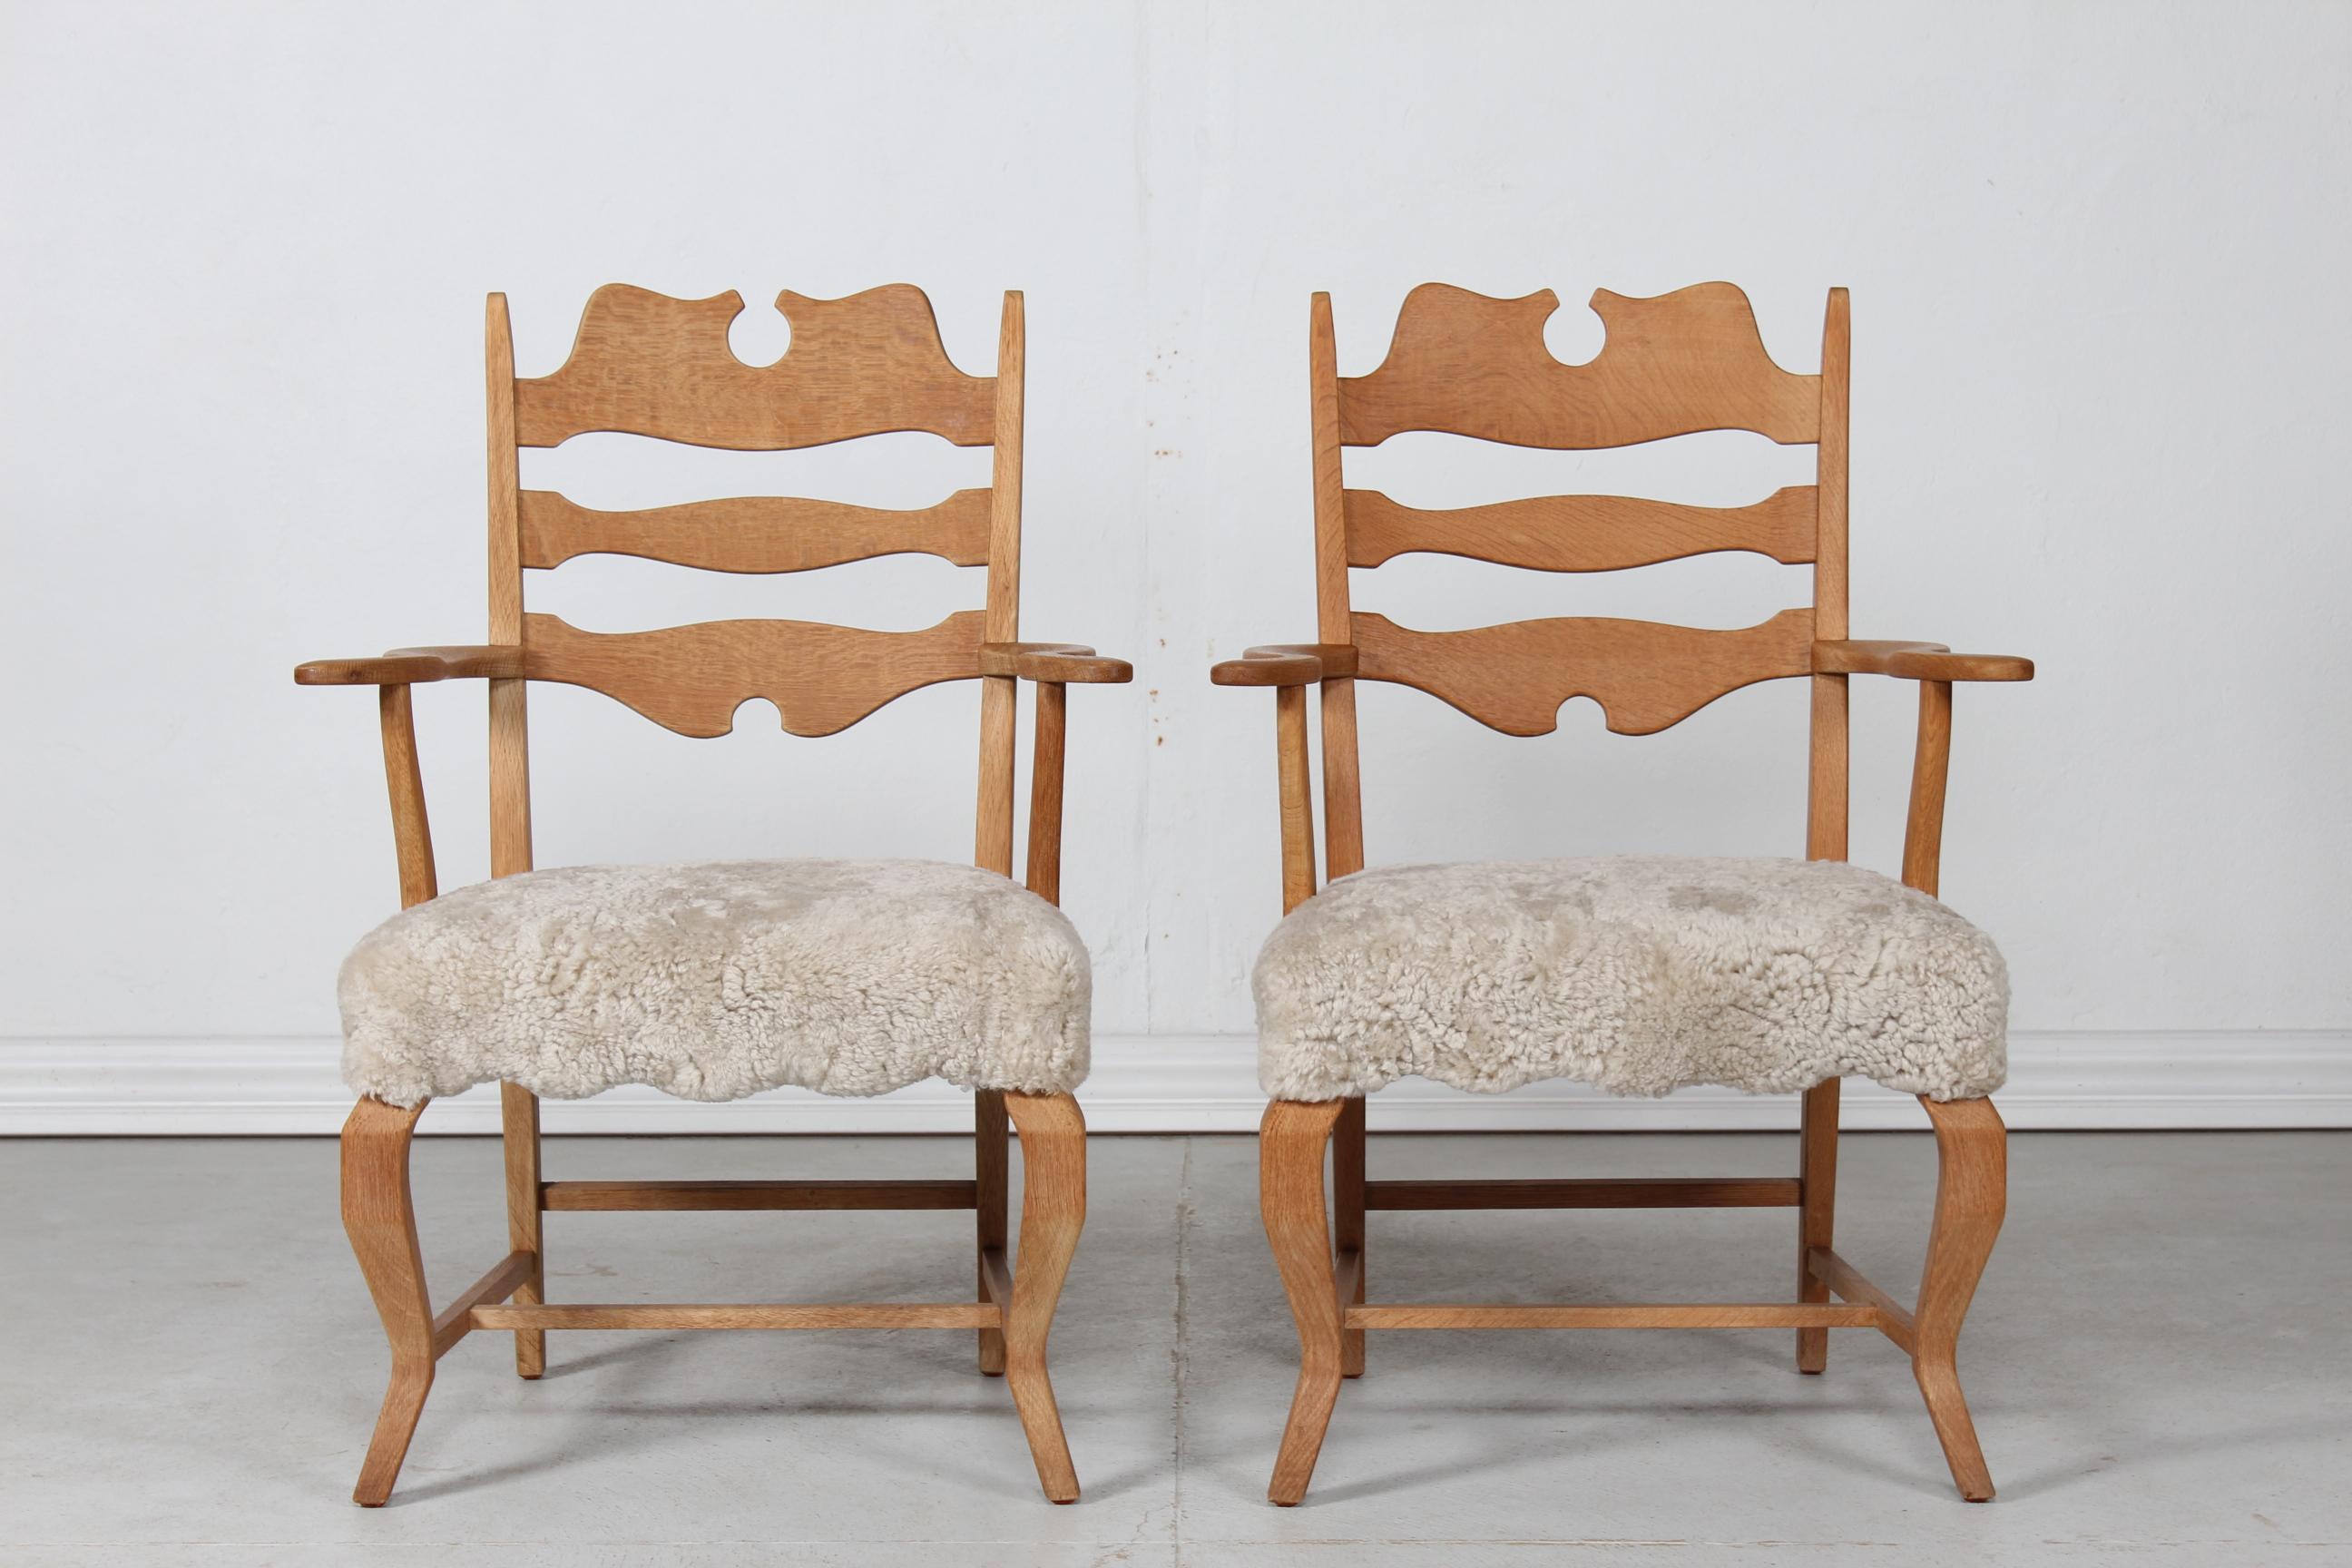 A pair of Danish vintage Henning Kjærnulf razor blade armchairs manufactured by EG Furniture.

The chairs are made of solid oak with high backrest. The seats are upholstered with new sheepskin which is very comfortable to sit on.

Nice vintage